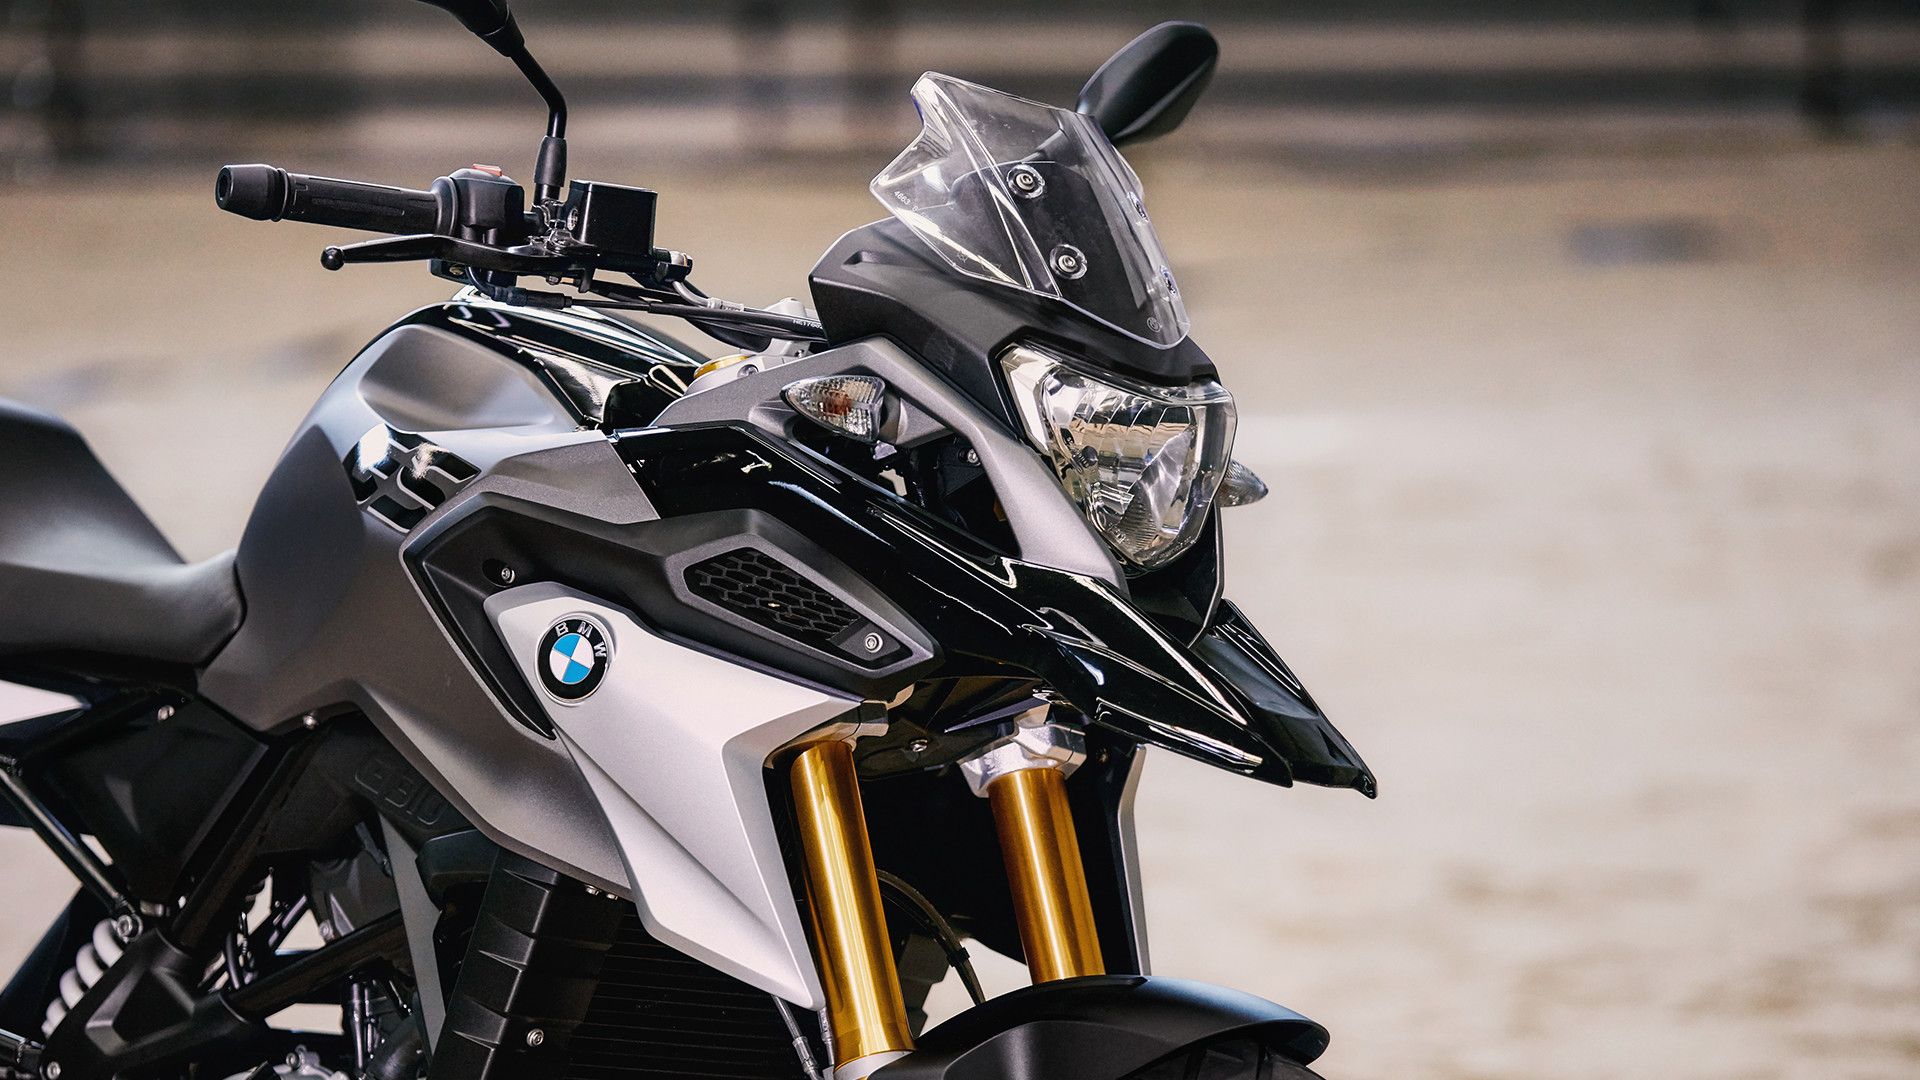 New BMW G 310 GS. BMW Motorcycles of Ventura County